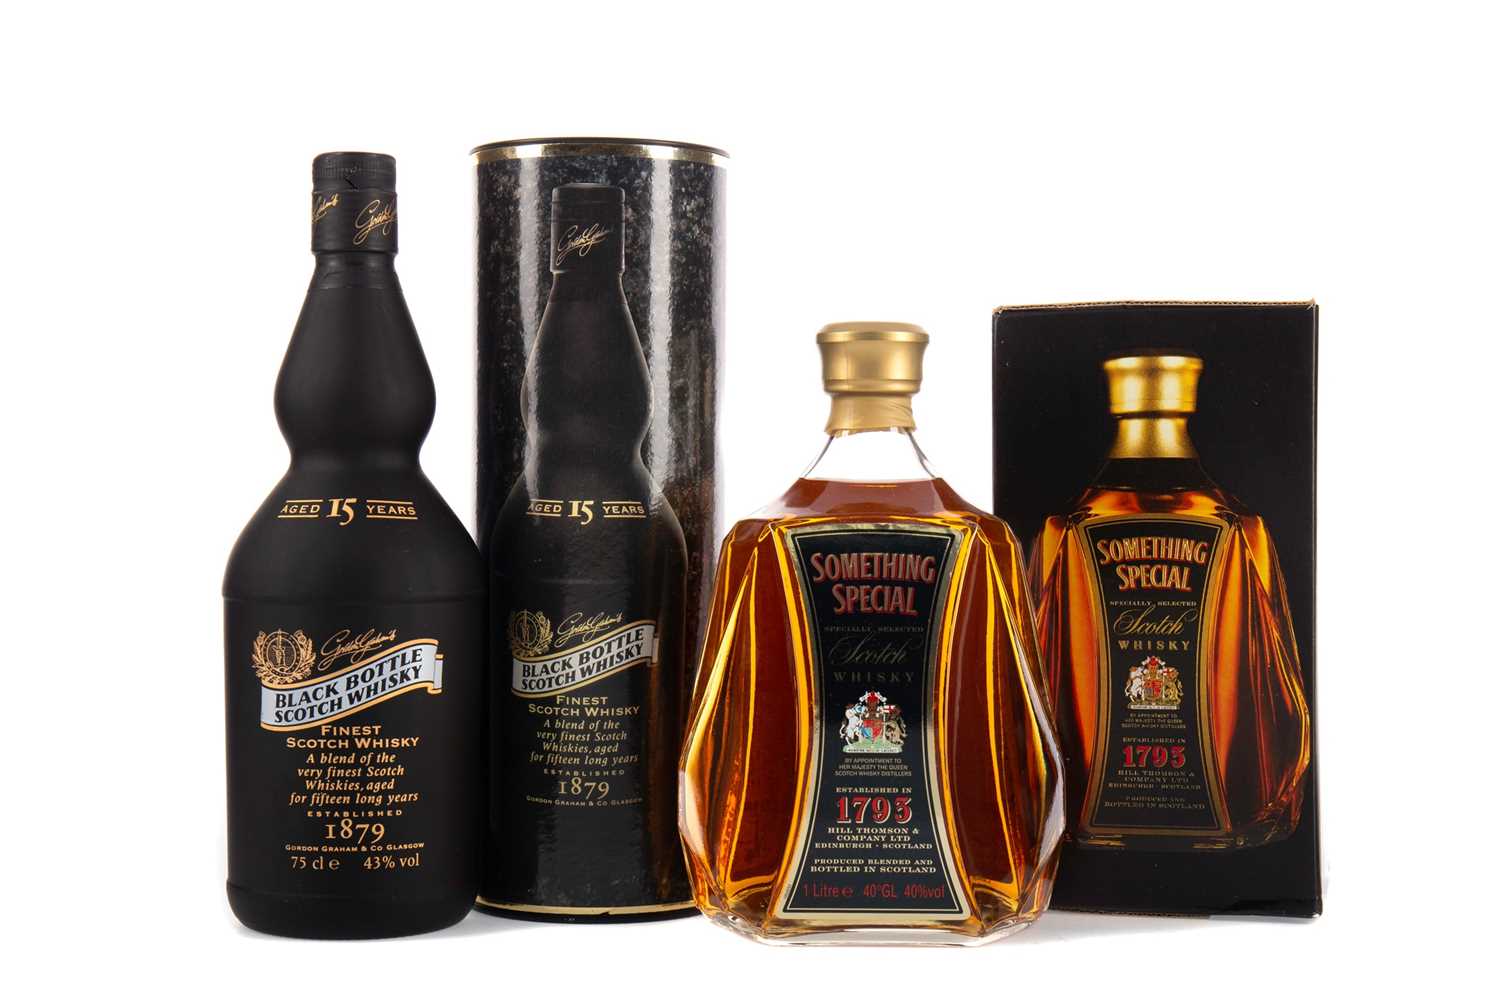 Lot 195 - SOMETHING SPECIAL 1793 AND BLACK BOTTLE AGED 15 YEARS